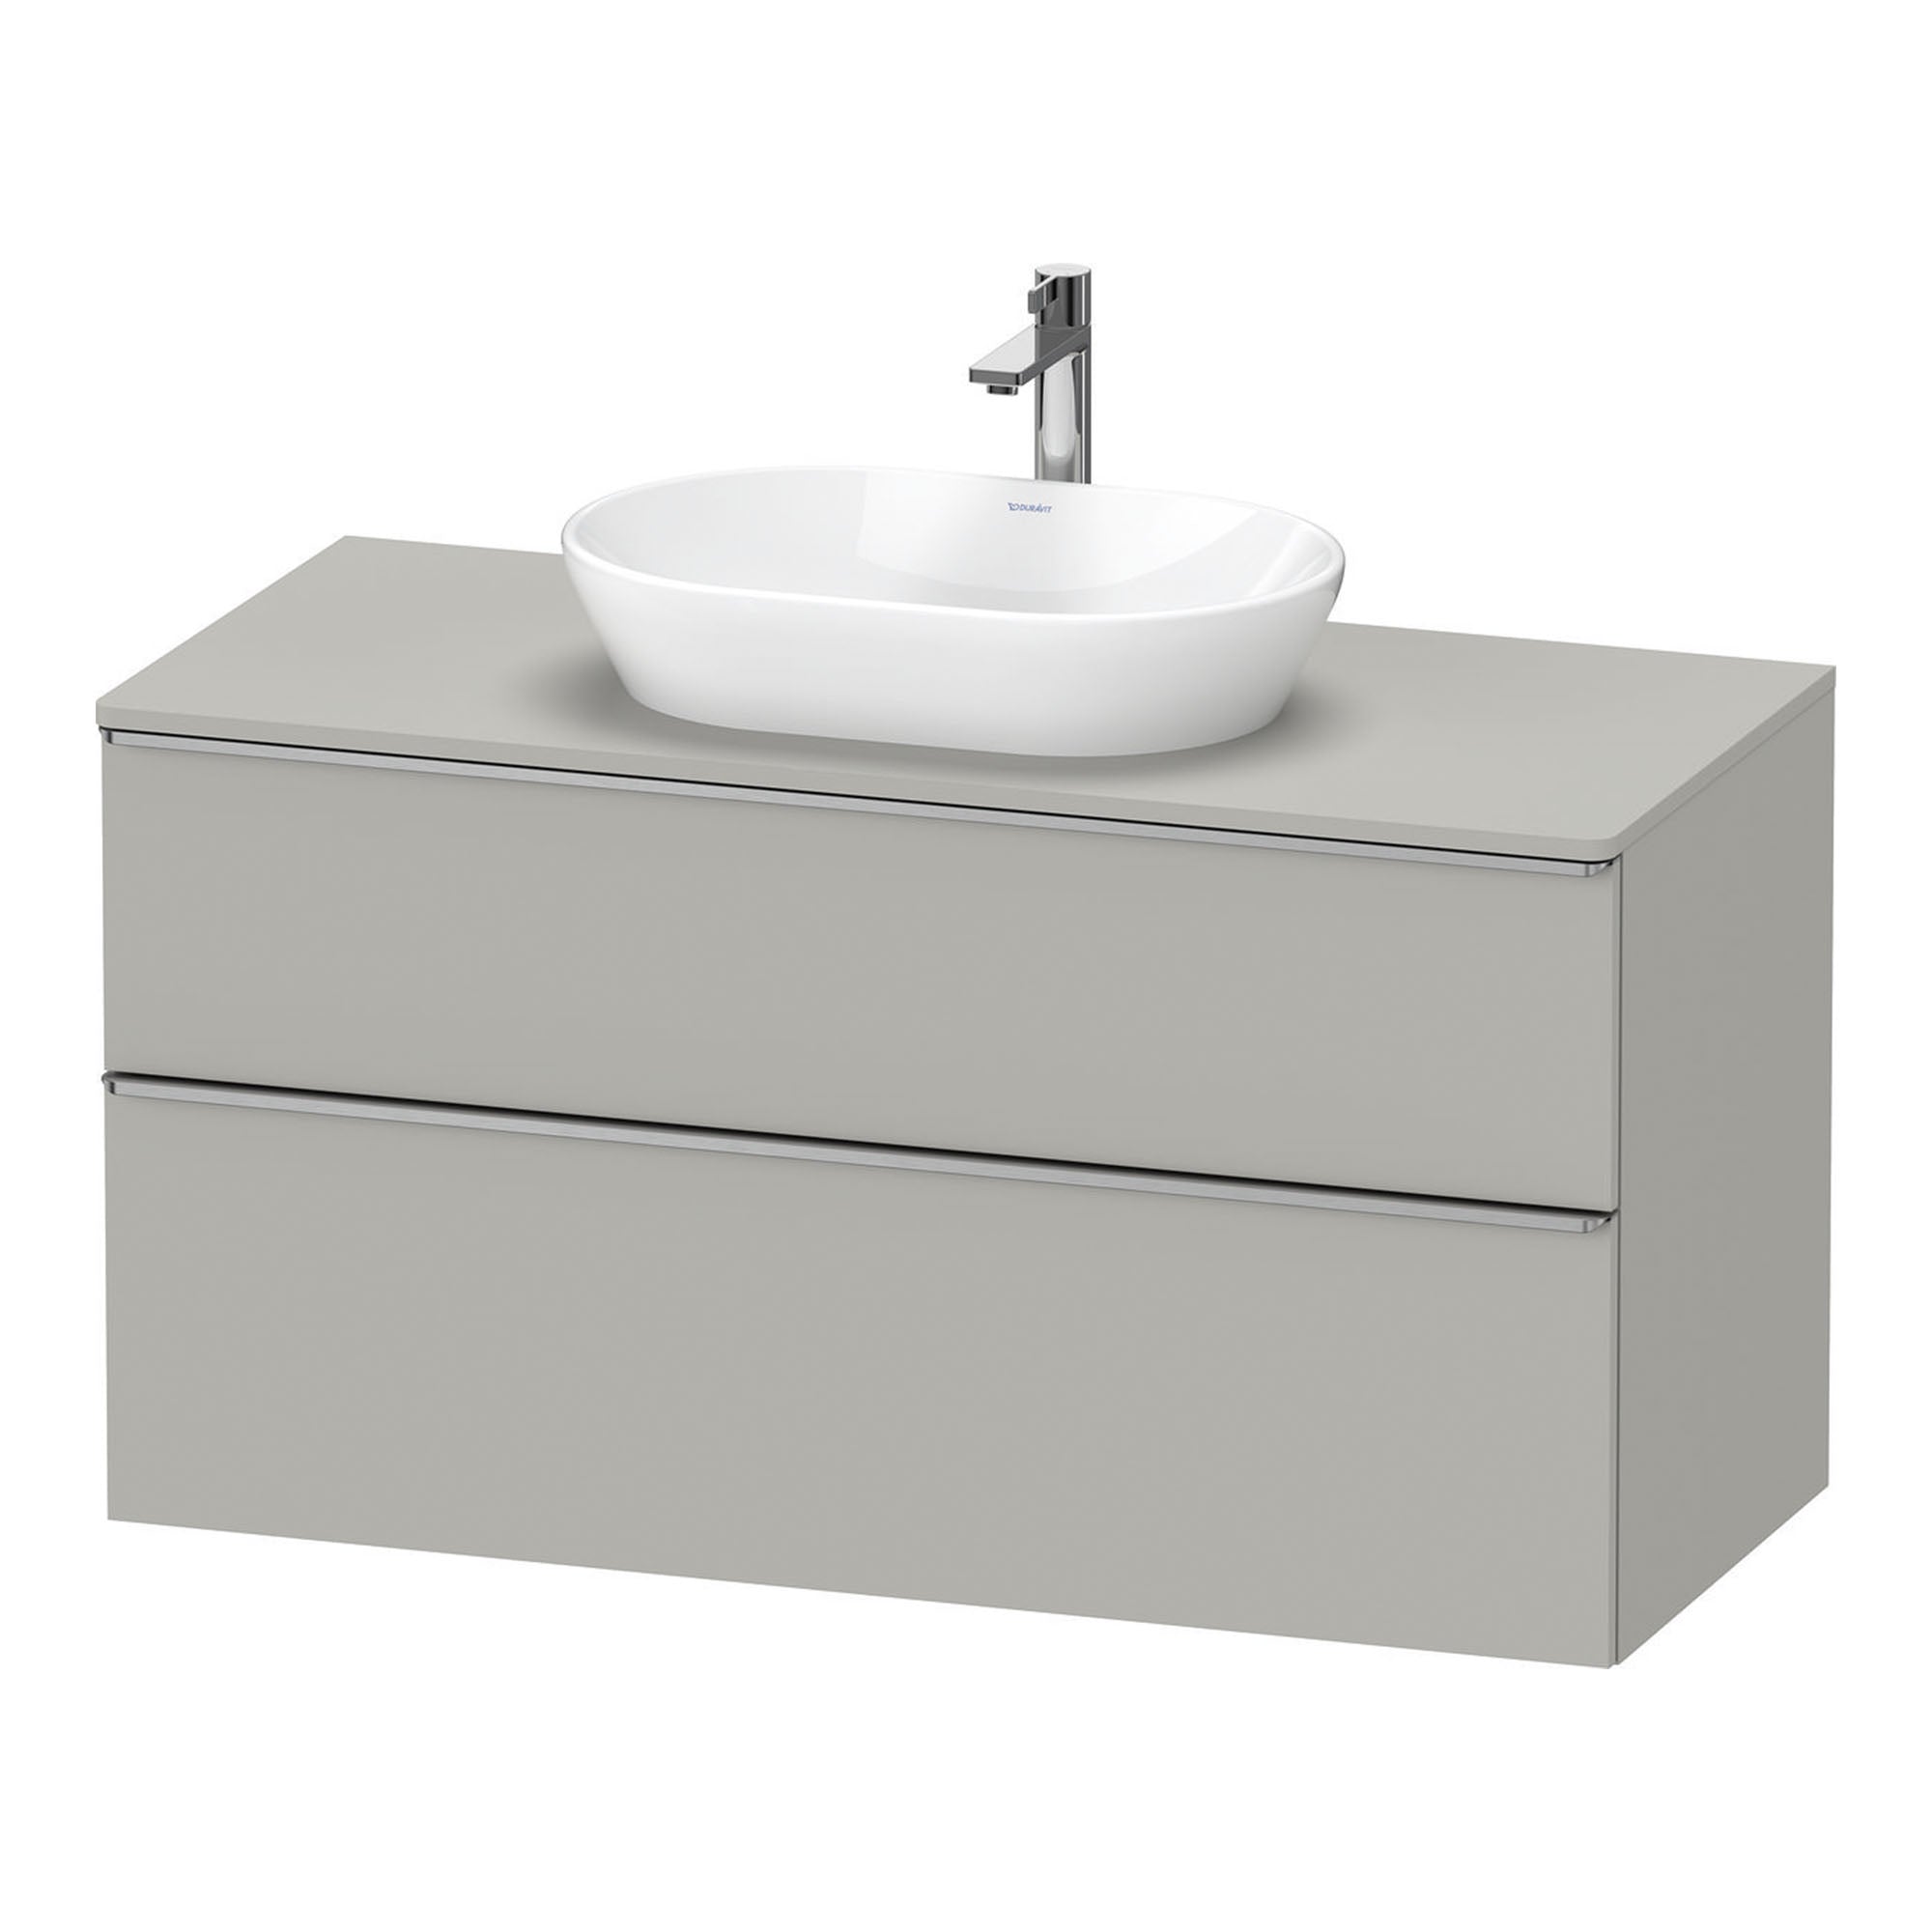 duravit d-neo 1000 wall mounted vanity unit with worktop concrete grey stainless steel handles